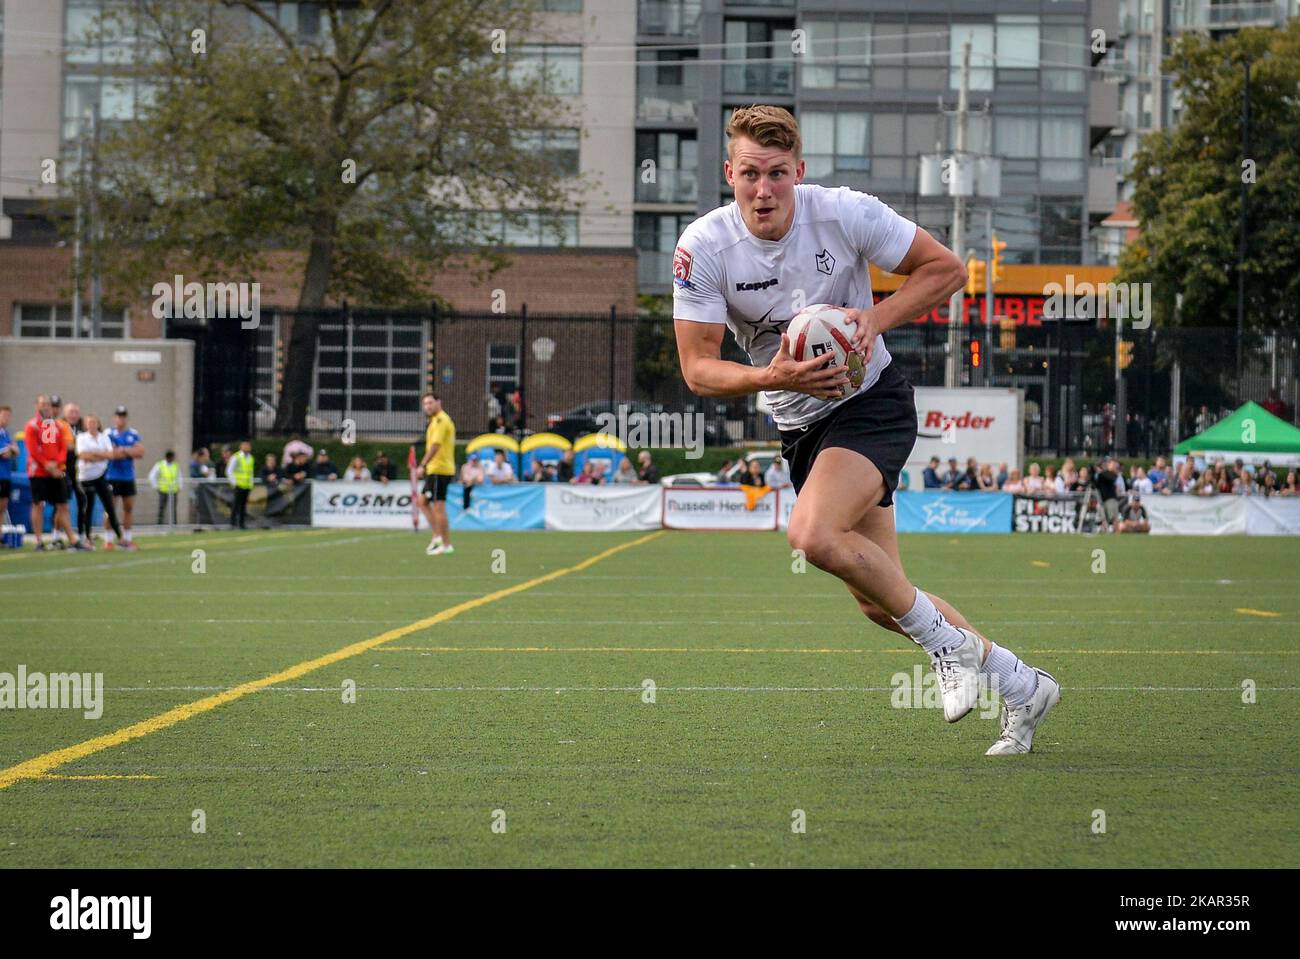 Jonny Pownall of Toronto Wolfpack in action during Super 8s Round 4 game between Toronto Wolfpack (Canada) vs Whitehaven RLFC (United Kingdom) at Allan A. Lamport Stadium in Toronto, Canada, on 2 September 2017. (Photo by Anatoliy Cherkasov/NurPhoto) Stock Photo